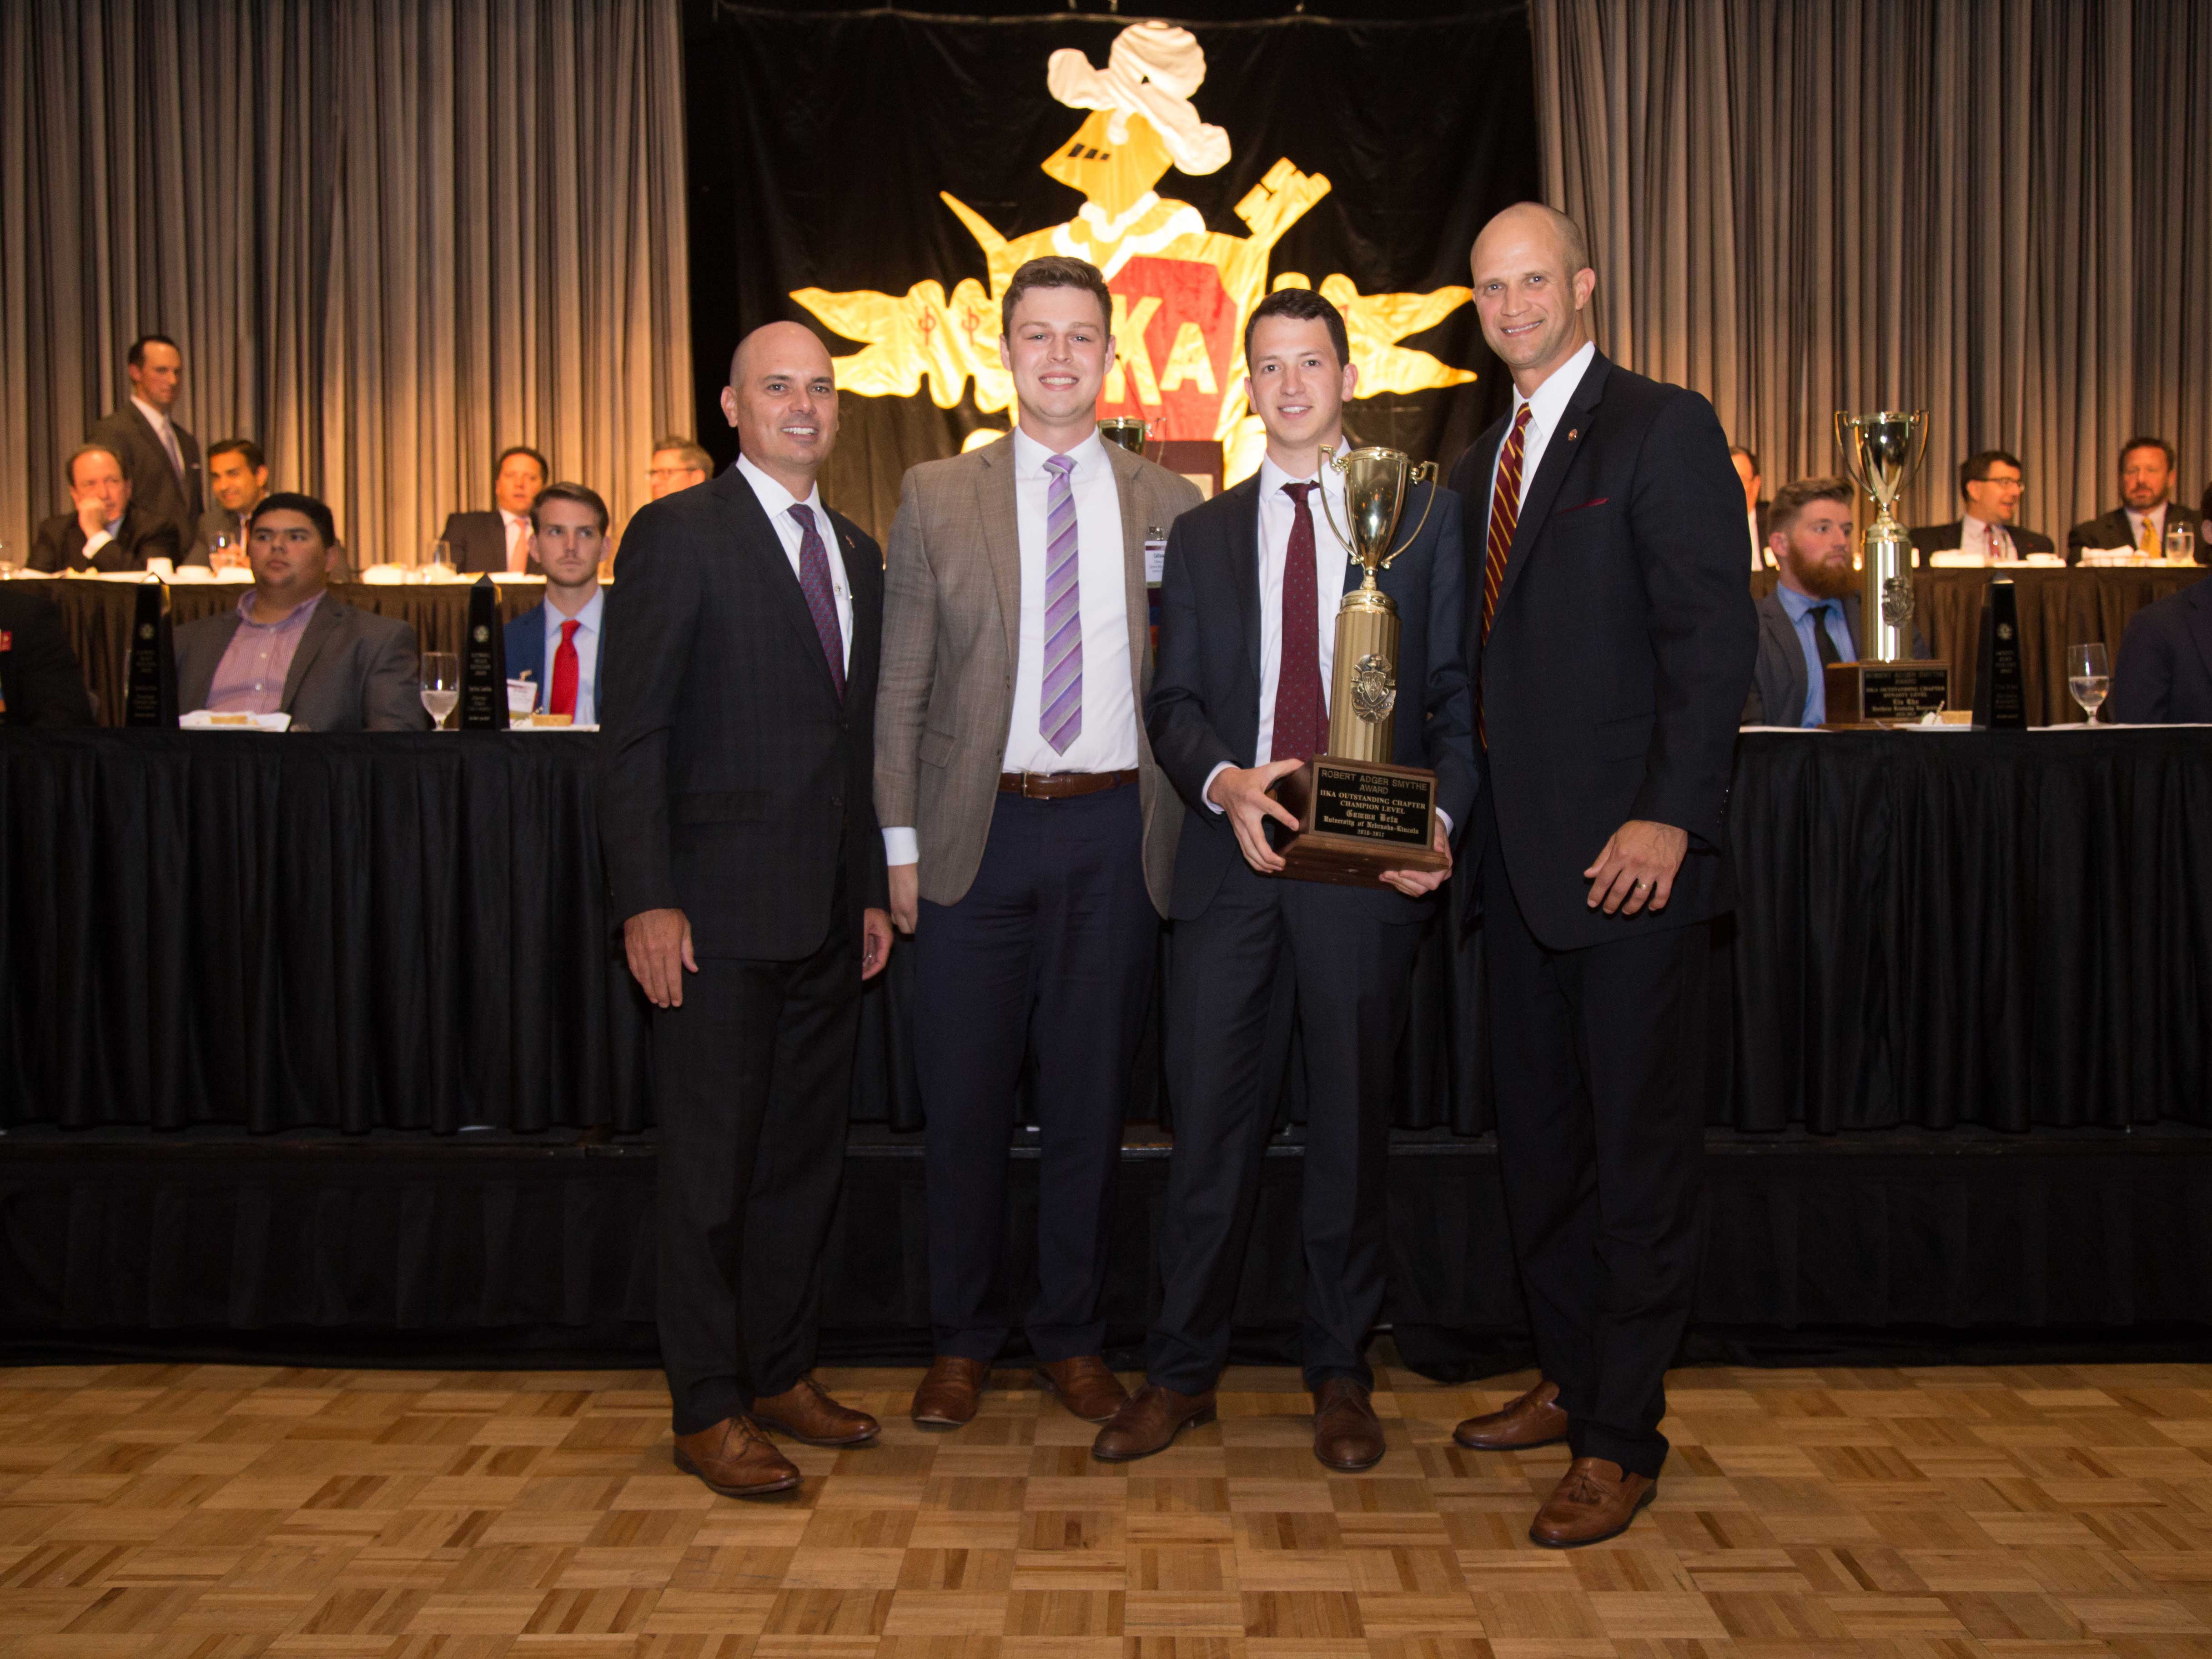 Pi Kappa Alpha fraternity at Nebraska received top honors at the 2017 Pi Kappa Alpha Academy. Pictured: PIKE International President Shad Williams, Callaway Holt, Phil Levos, and PIKE Executive Vice President & CEO Justin Buck.